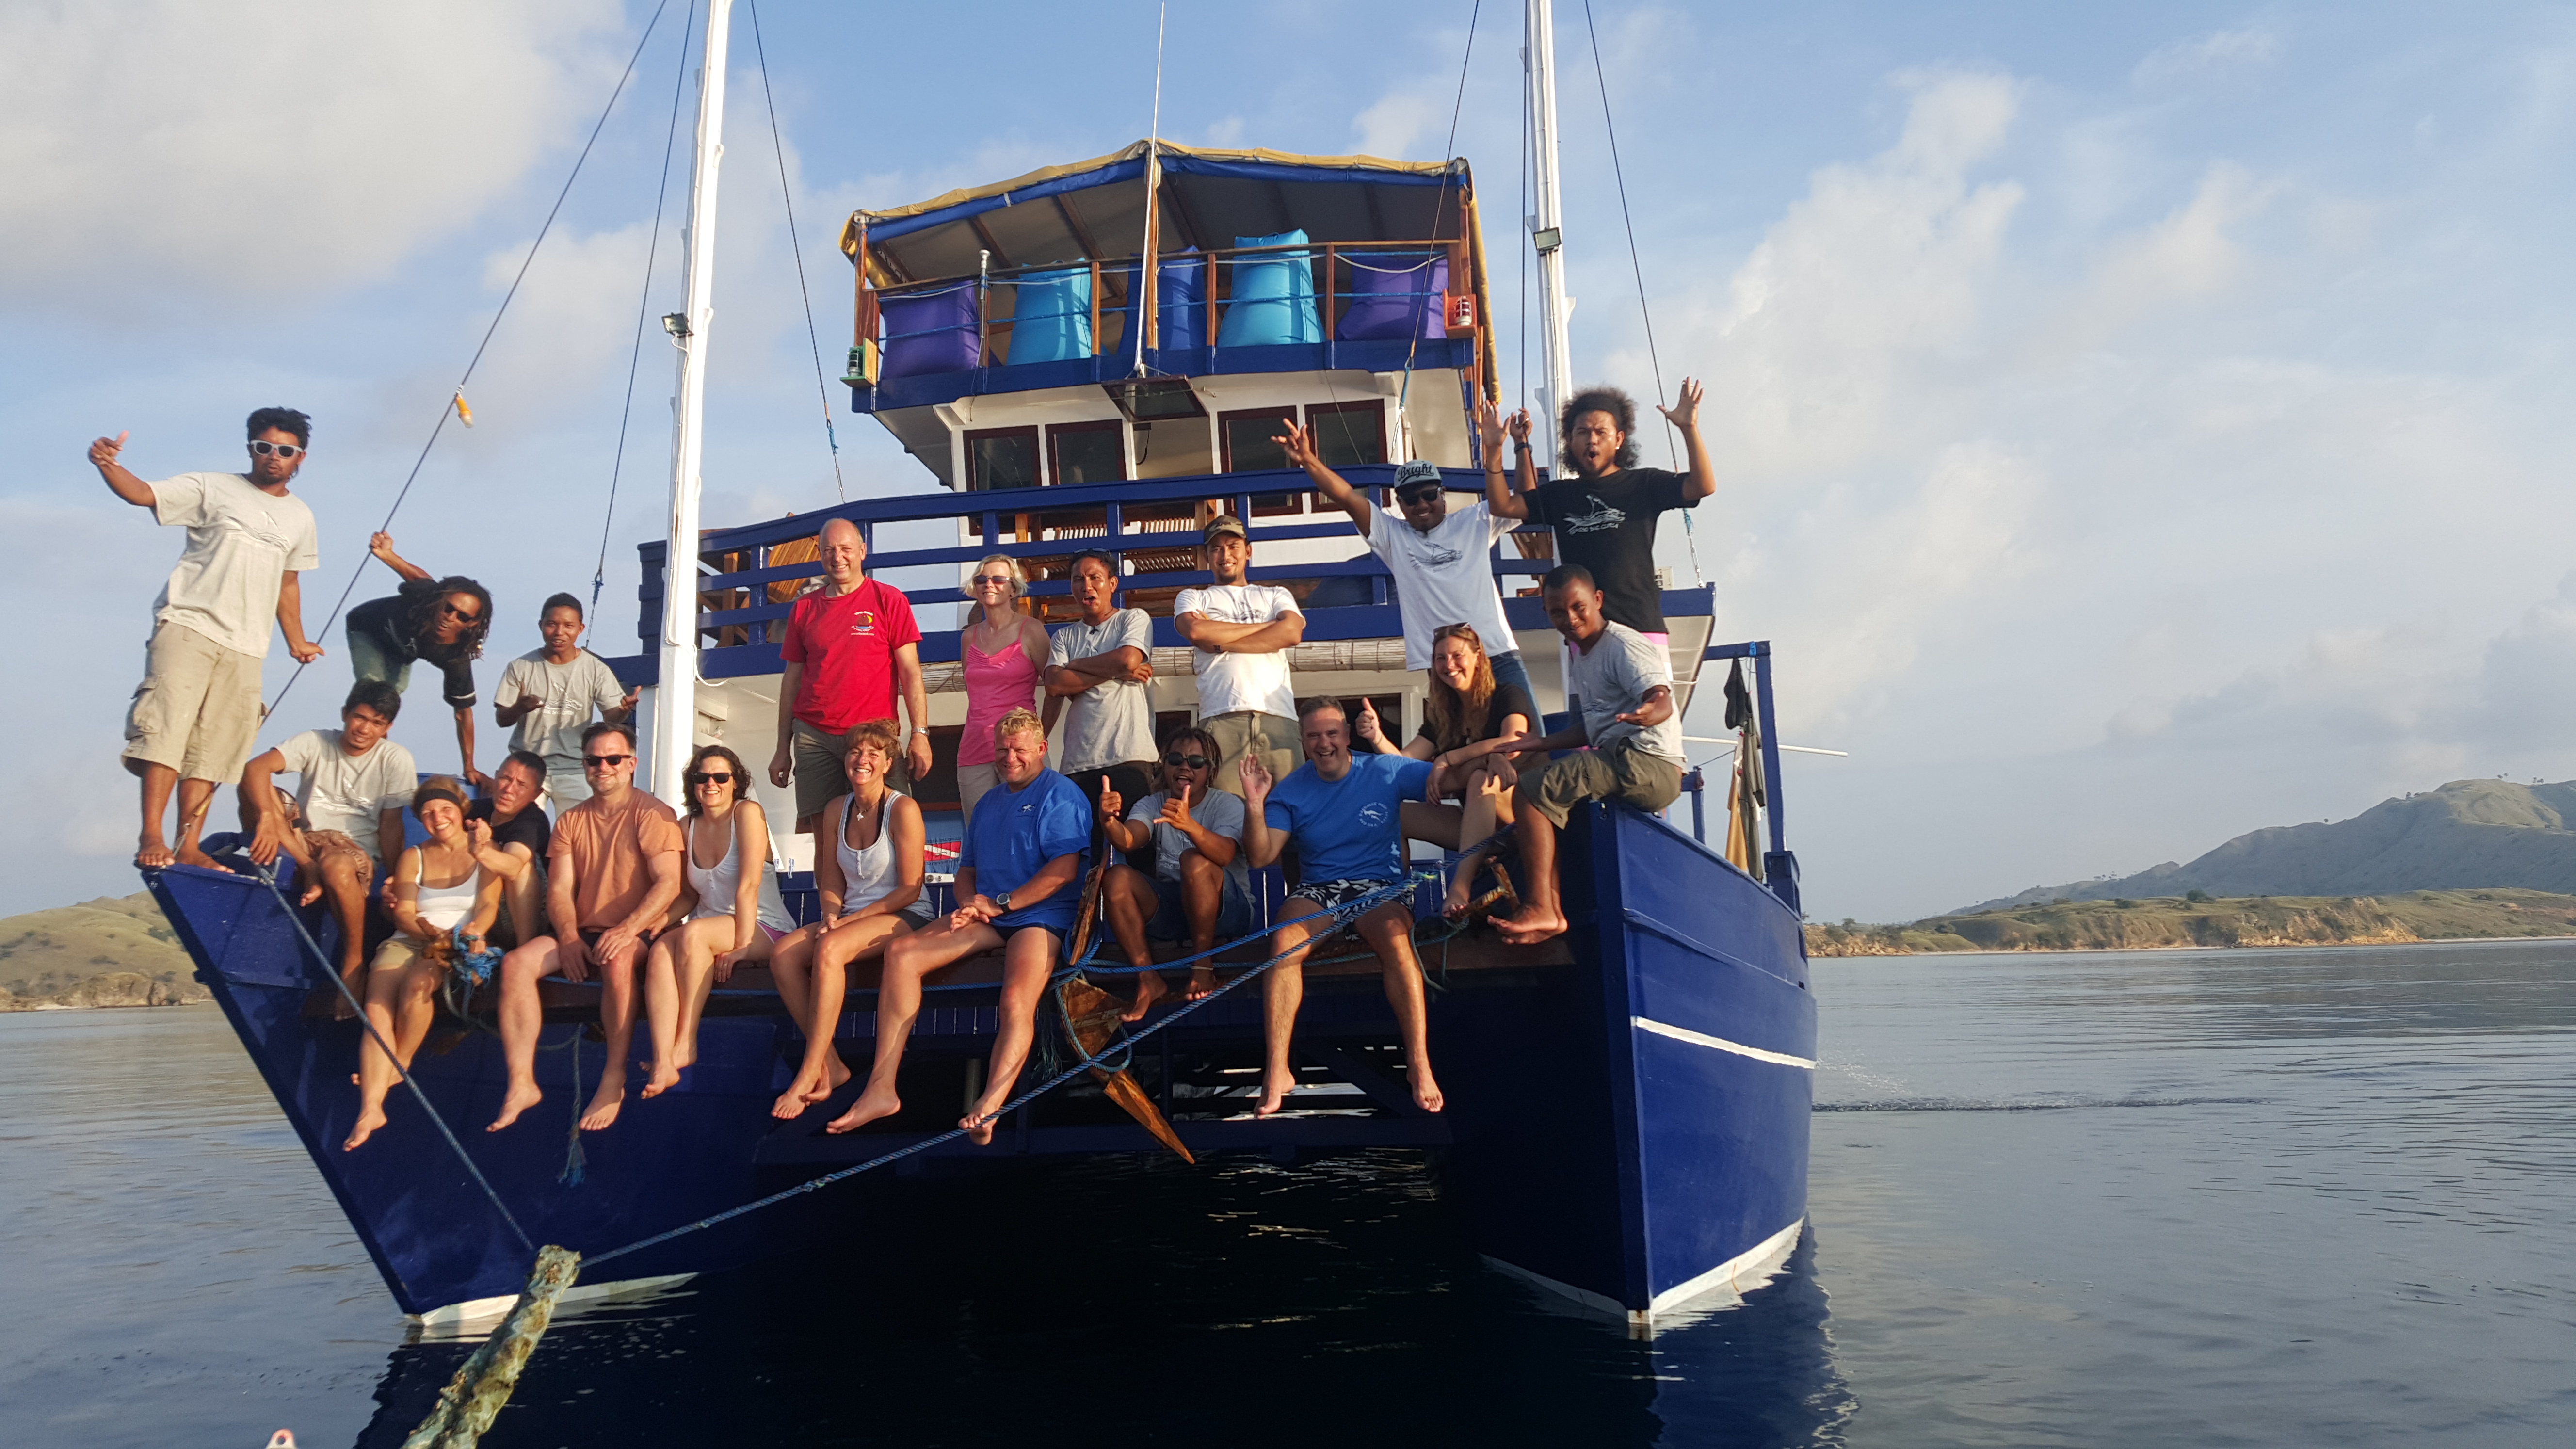 Happy guest make a happy crew, welcome to KOMODO